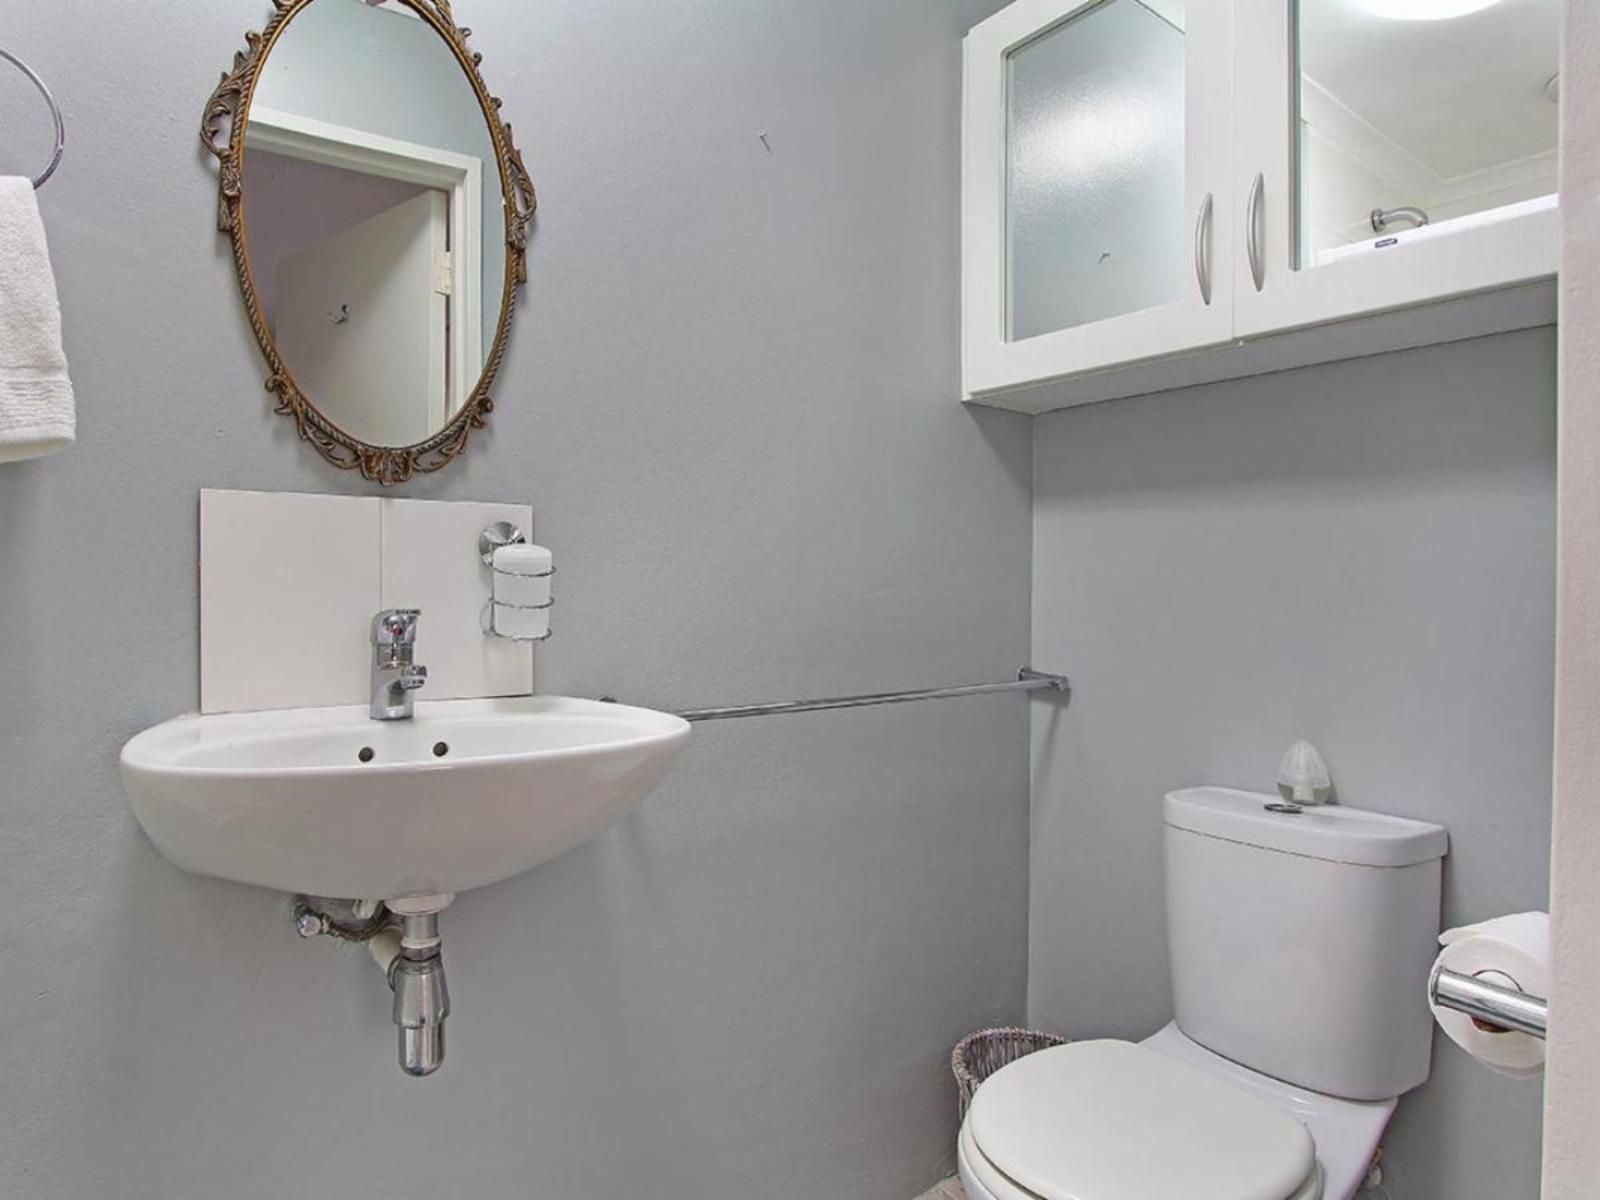 Marechale Way By Hostagents Woodbridge Island Cape Town Western Cape South Africa Colorless, Bathroom